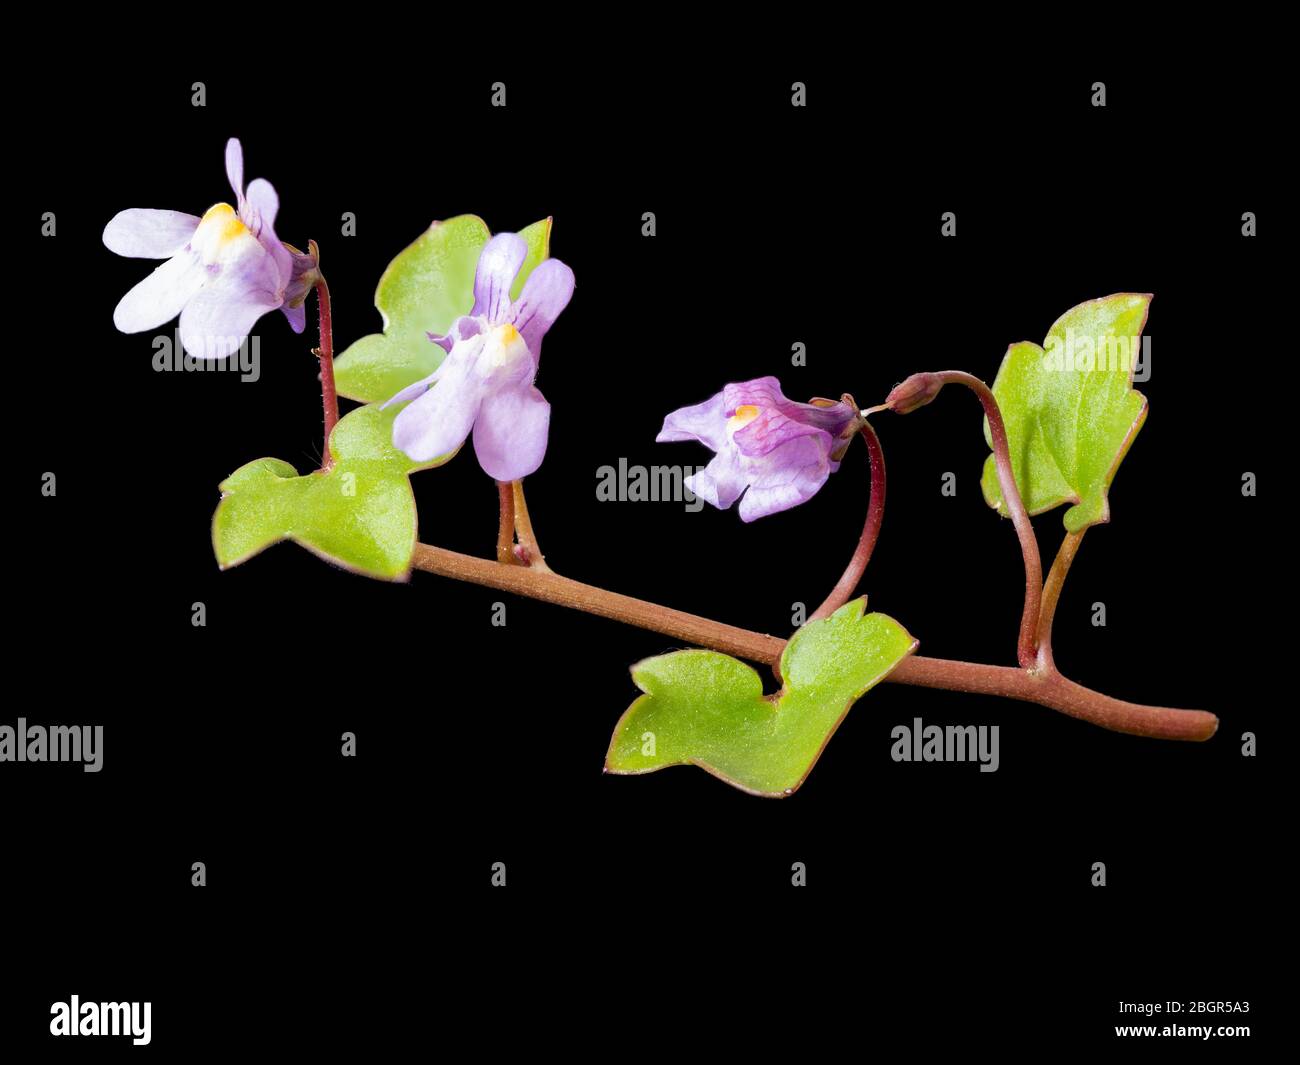 Close up image of the UK native wildflower, Cymbalaria muralis, ivy leaved toadflax, on a black background Stock Photo